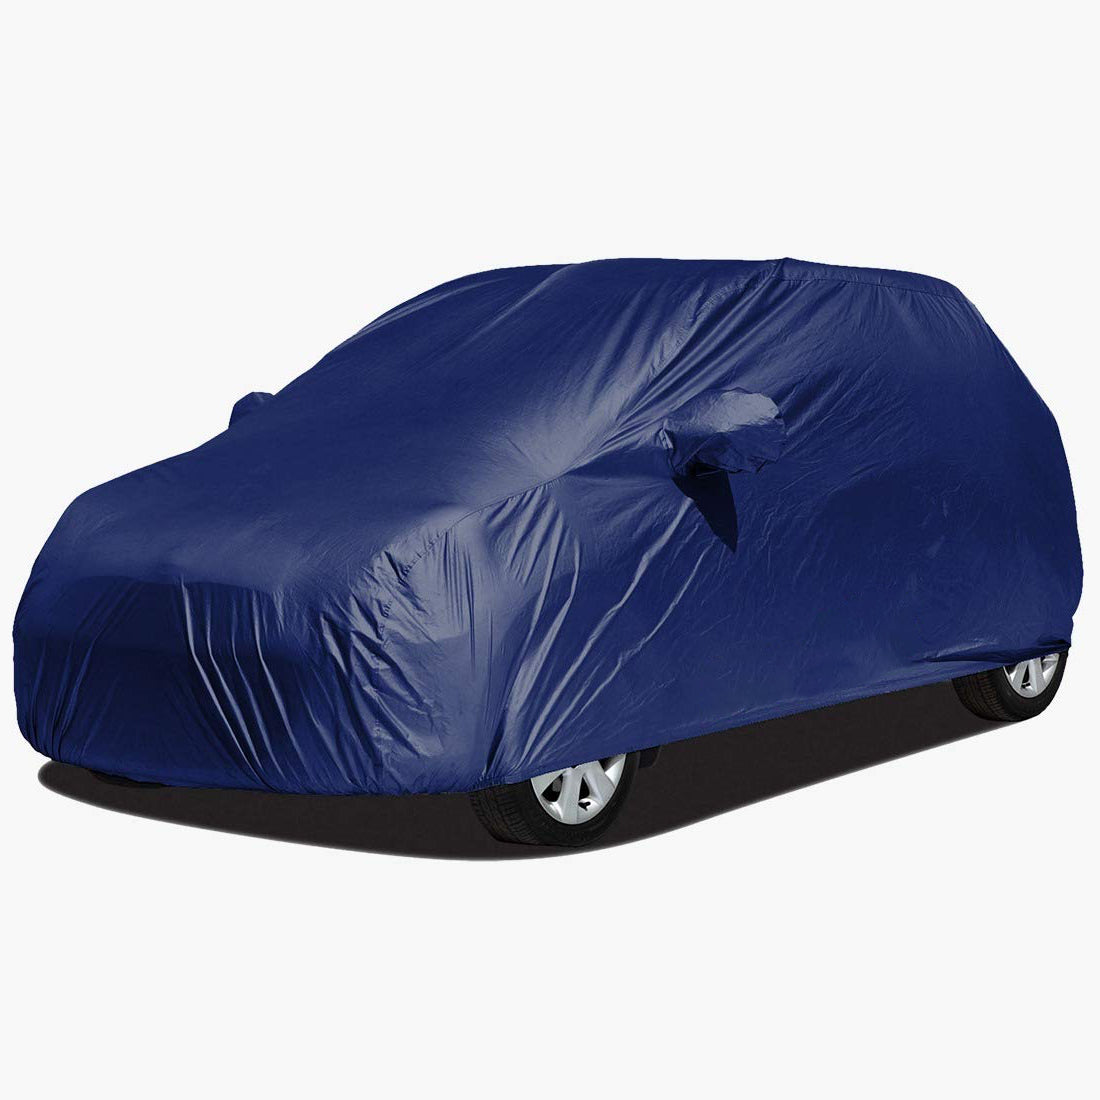 Hyundai Elite i20 Car Body Cover, Heat & Water Resistant, Dustproof without side mirror pockets